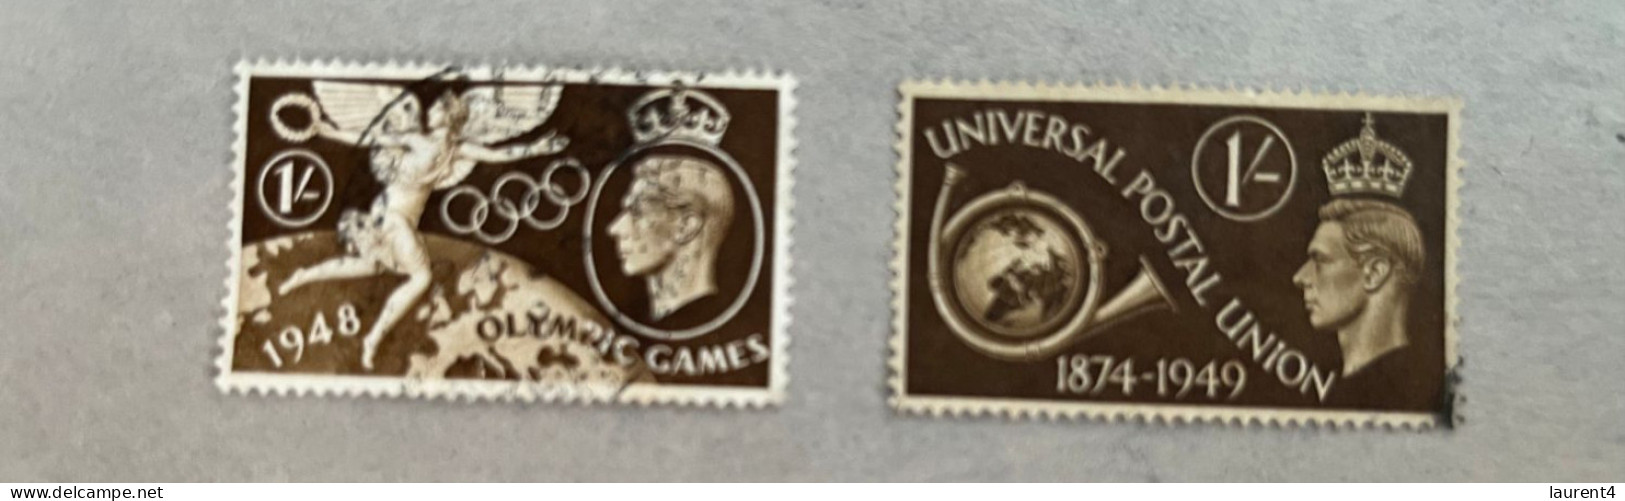 13-8-2023 (stamp) Selection Of 2 UK 1948 (higher Values) Olympic Used Stamps + UPU (1949) - Ete 1948: Londres